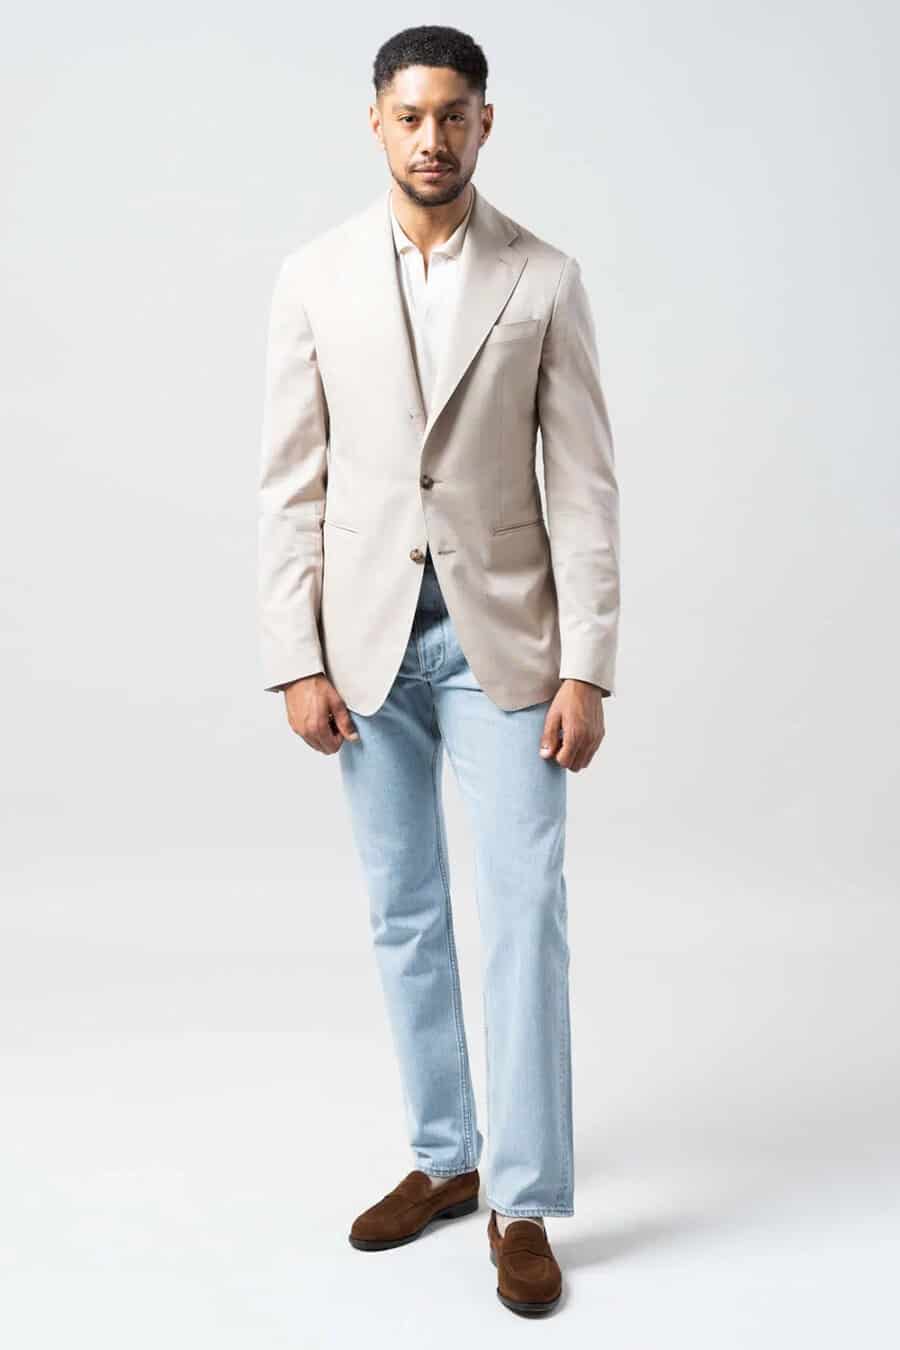 Men's pale blue wash jeans, white polo shirt, beige blazer and brown suede penny loafers outfit